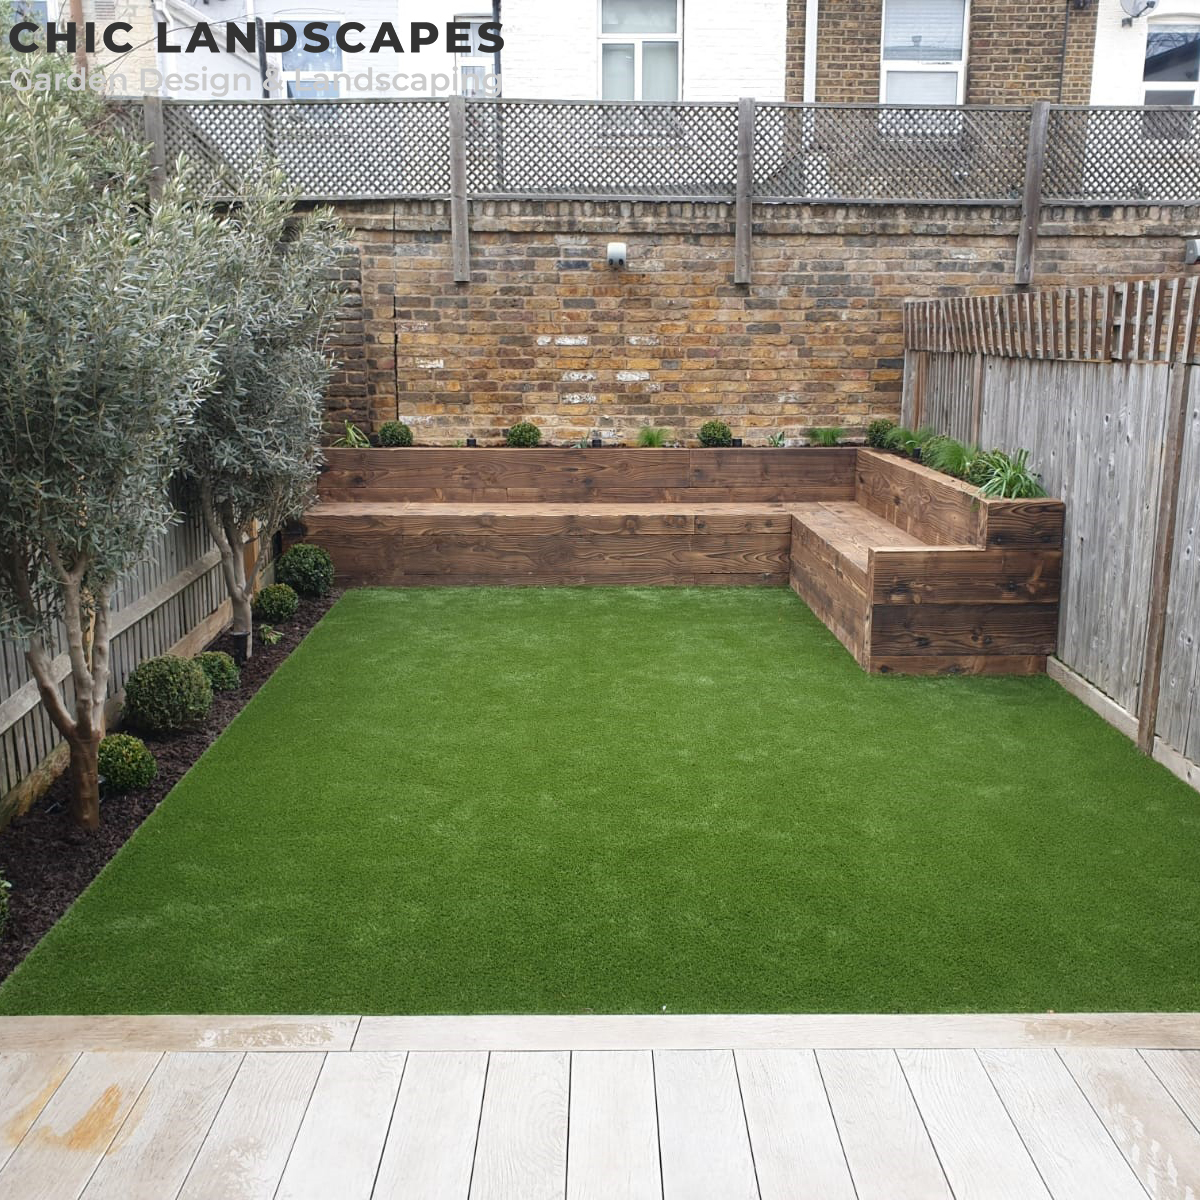 Decking and Seating Area